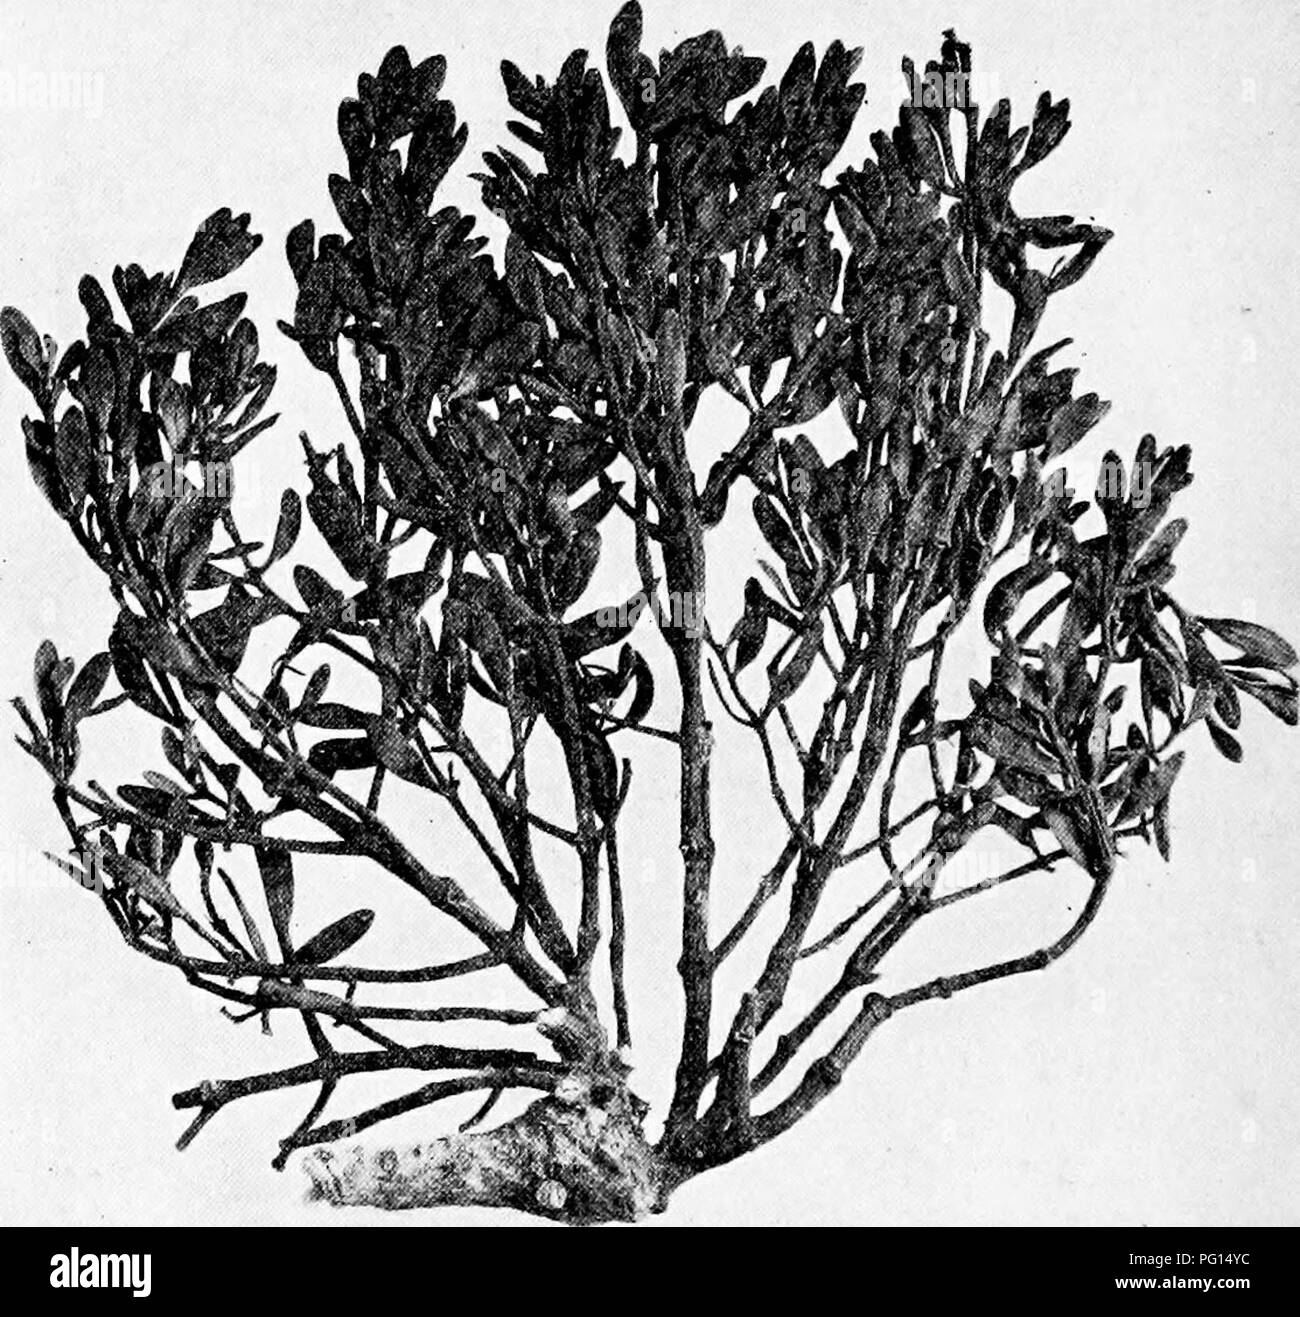 . Manual of tree diseases . Trees. 56 MANUAL OF TREE DISEASES On pine (three and two to three needle, pitch pines) R. eampylopoda (Engelm.) Piper. Pacific Coast R. cryptopoda (Engelm.) Coville. Central and southern Rocky Mountains iJ. americana (Nutt.) Kuntze. Rocky Mountains to Sierra Nevada Mountains. Fig. 3. — Mistletoe (Phoradendron pauciftorum) growing on white fir. The only representative of the dwarf mistletoes occurring in eastern United States is R. pn^illa, which causes witches'- brooms on spruce. A discussion of this disease will be found on page 321.. Please note that these images  Stock Photo